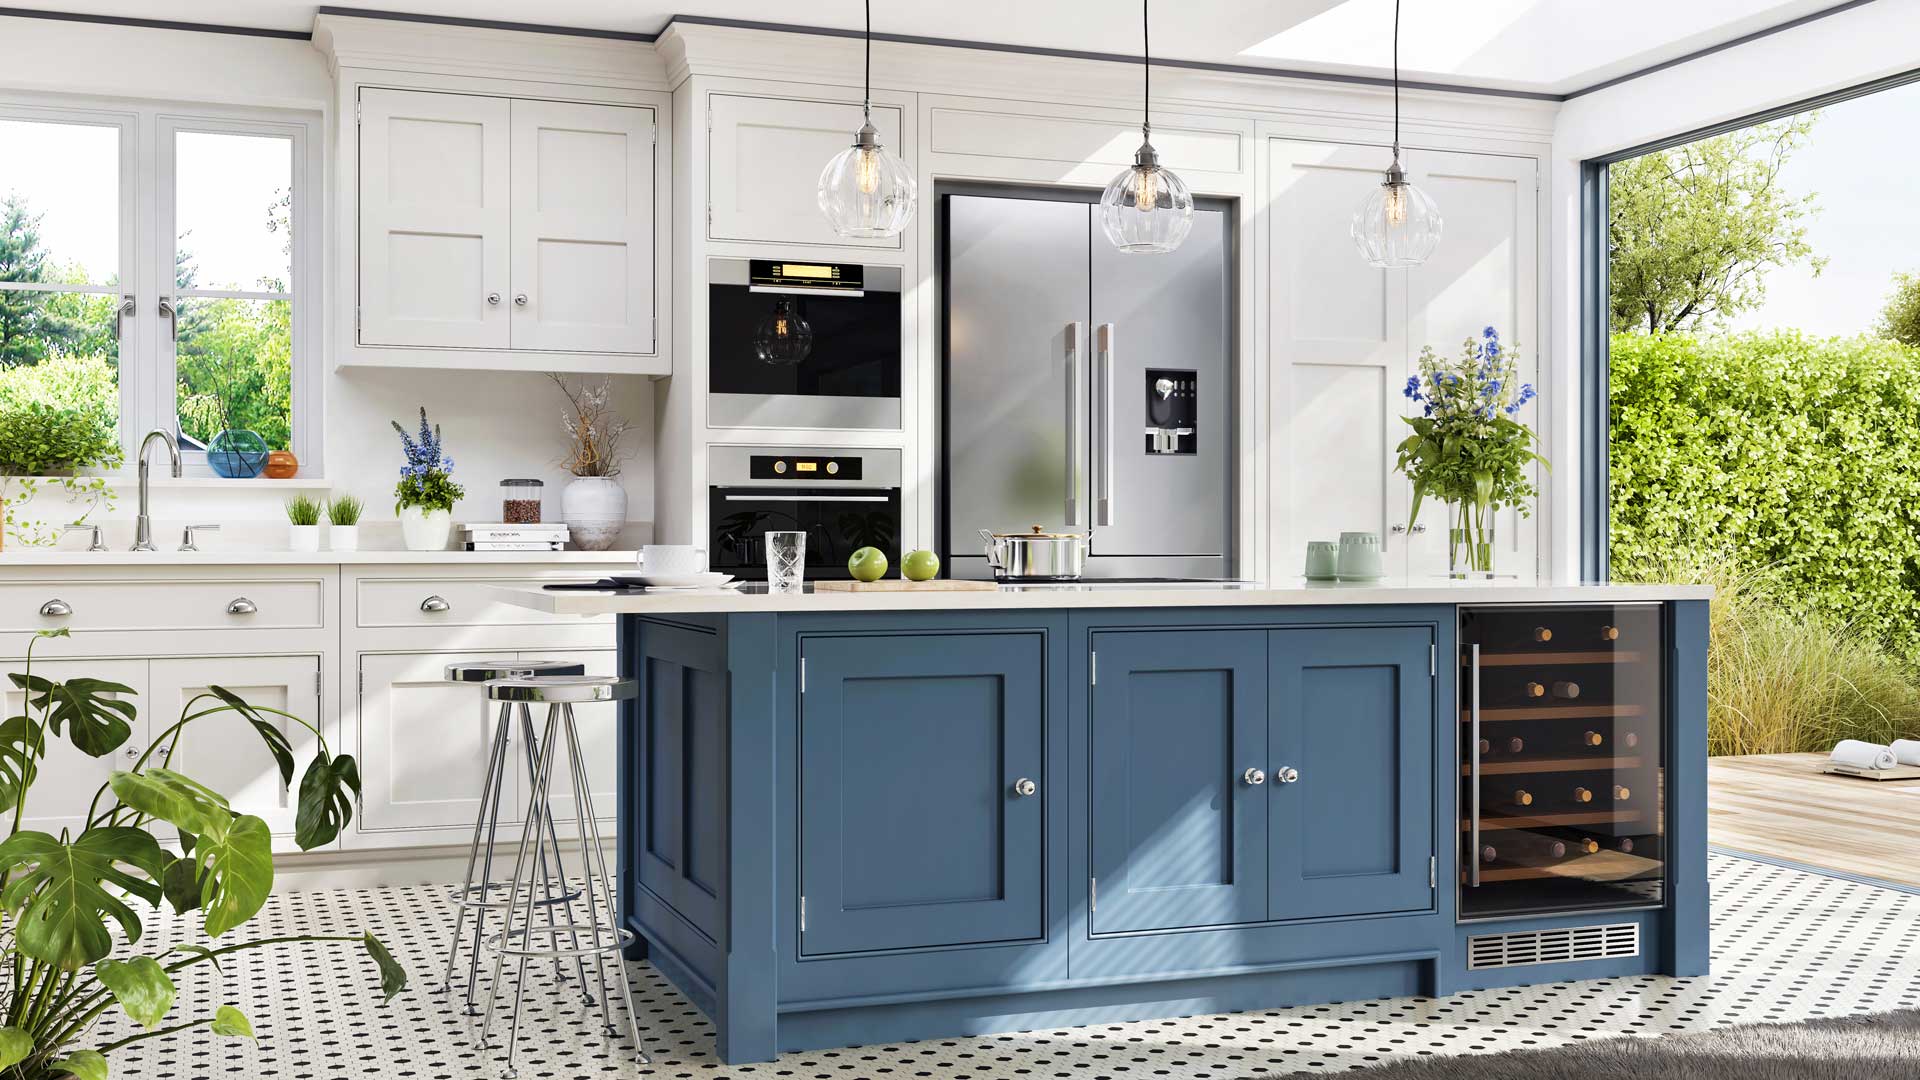 A kitchen with blue cabinets and a stainless steel refrigerator